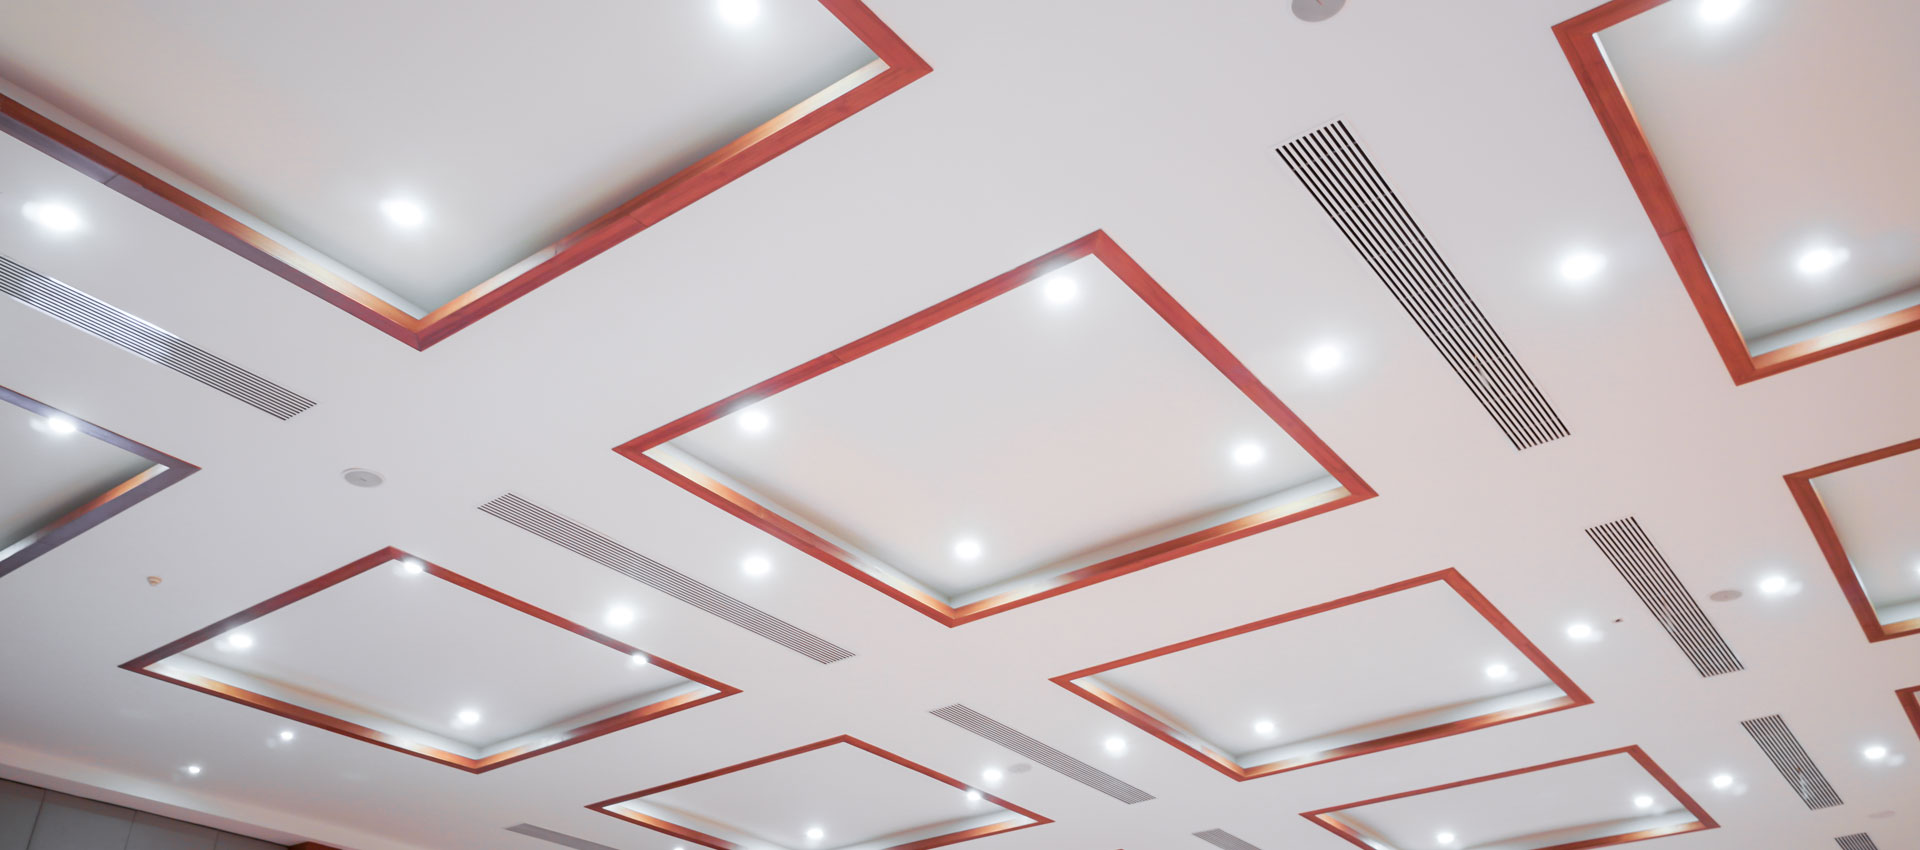 led ceiling downlights